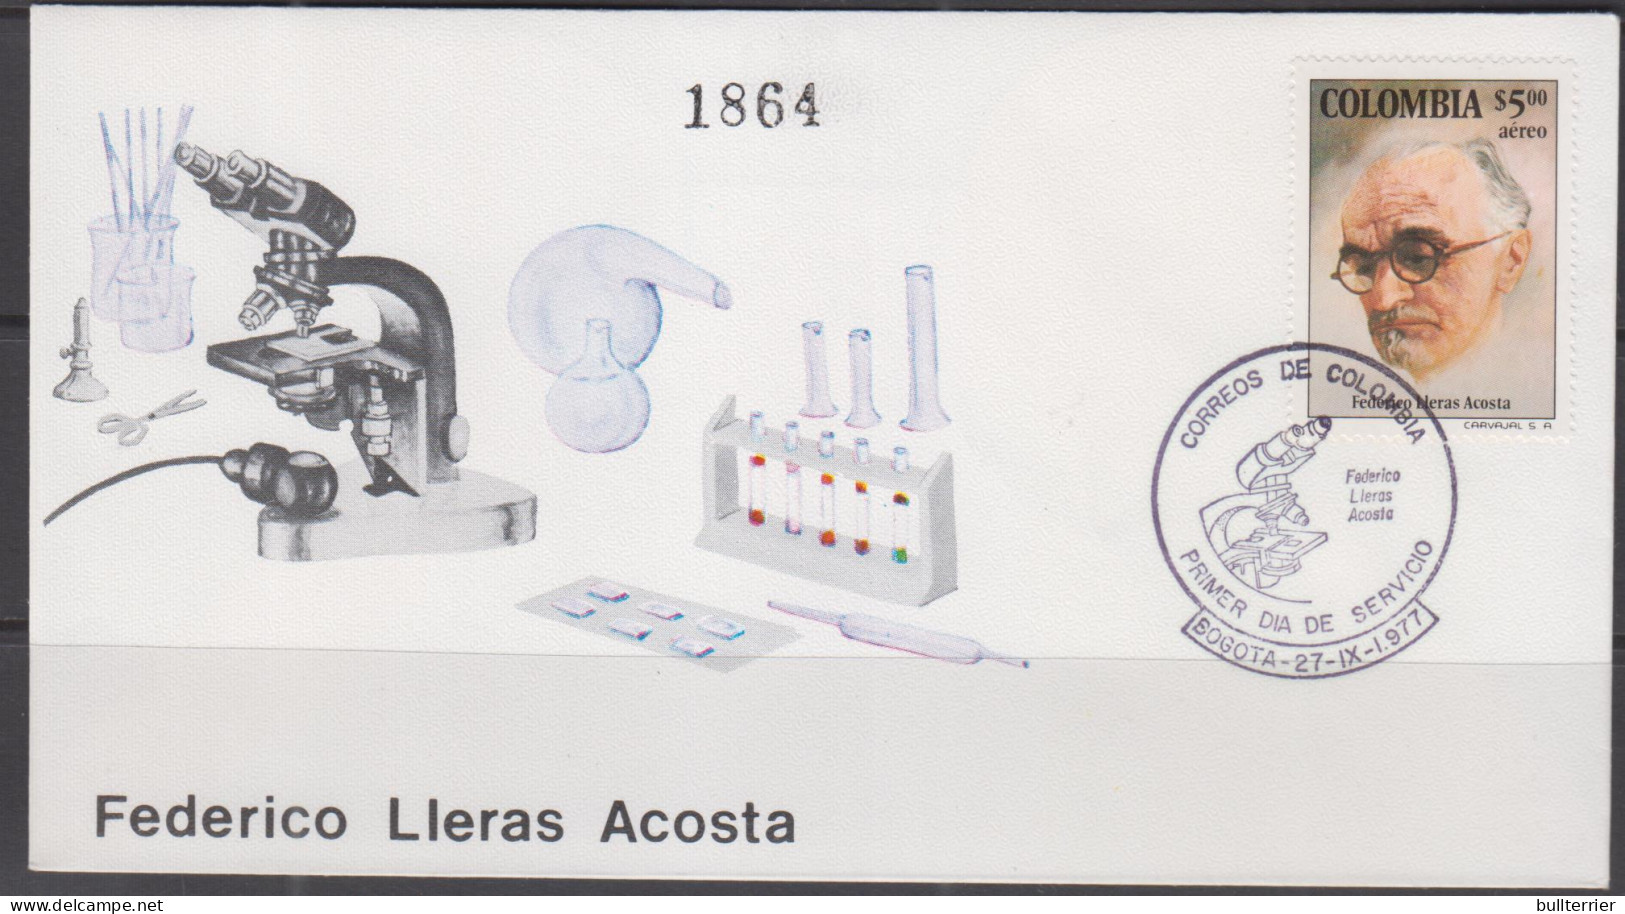 MEDICINE - COLOMBIA - FEDERICO ACOSTA / MICROSCOPES ON ILLUSTRATED FIRST DAY COVER - Médecine